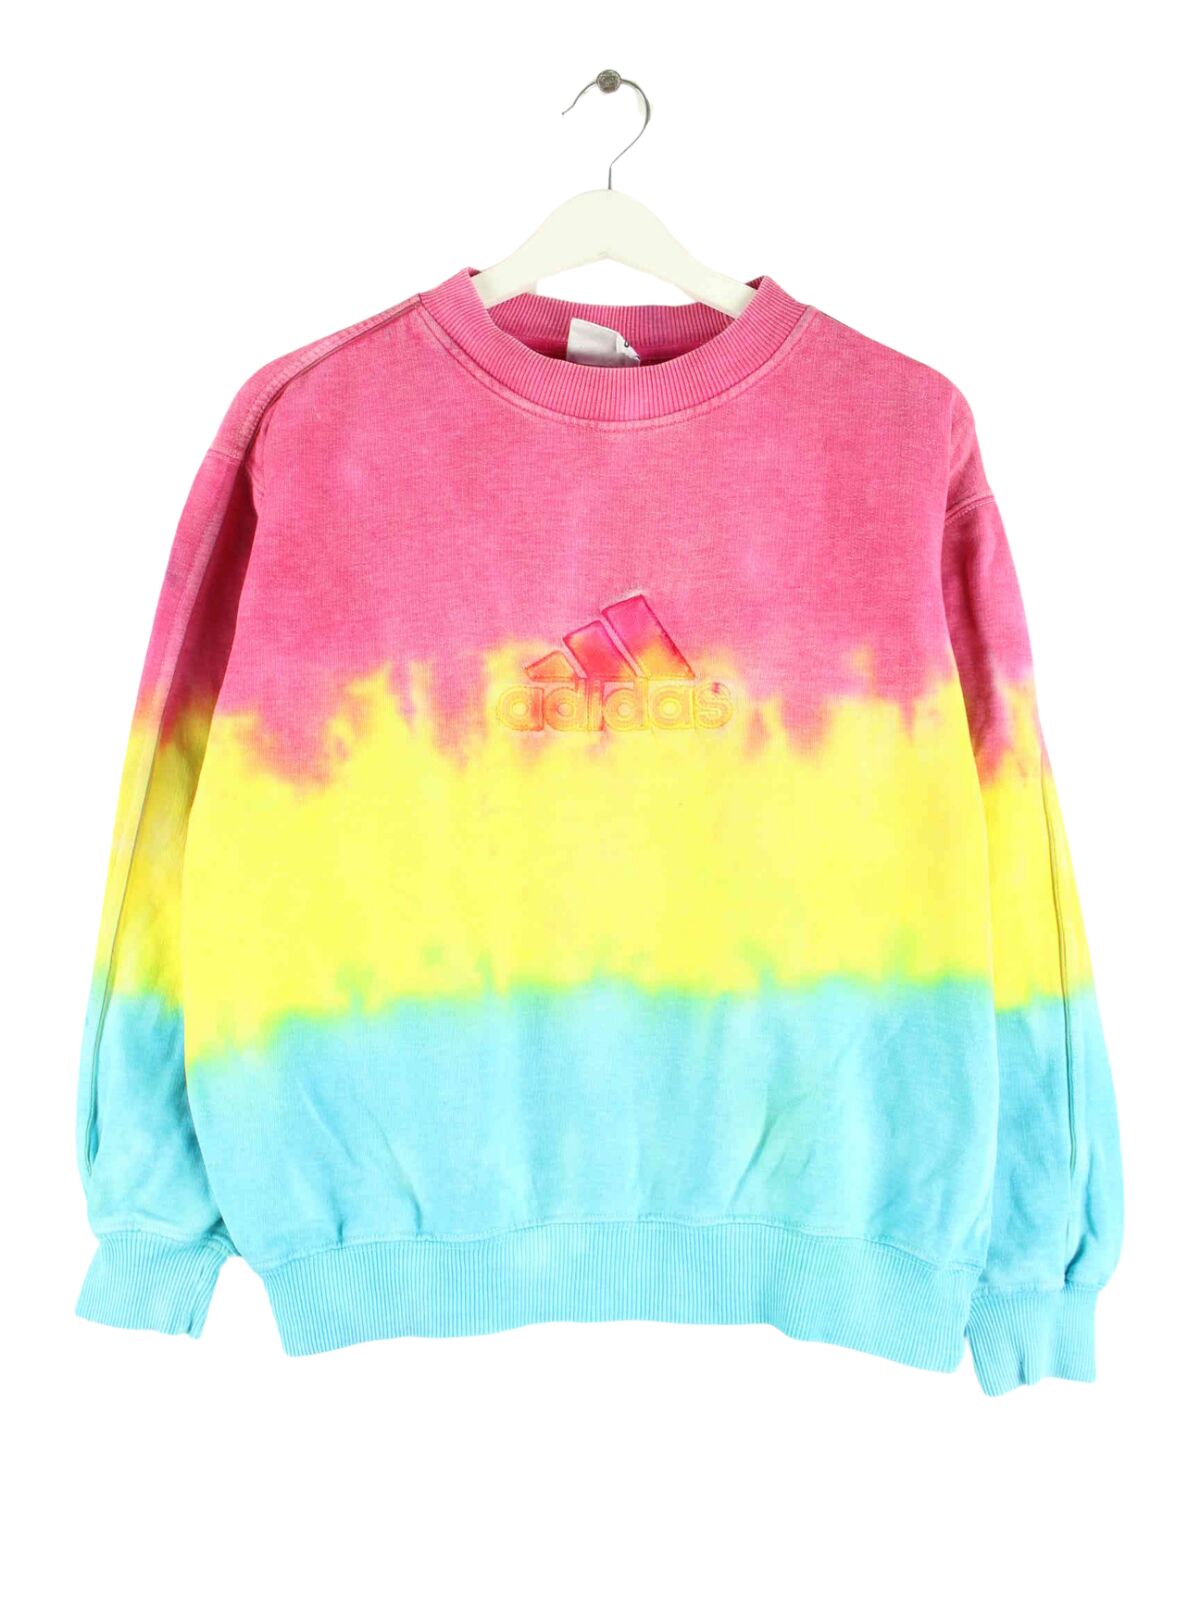 Adidas 90s Vintage Embroidered Tie Dye Sweater Mehrfarbig XS (front image)